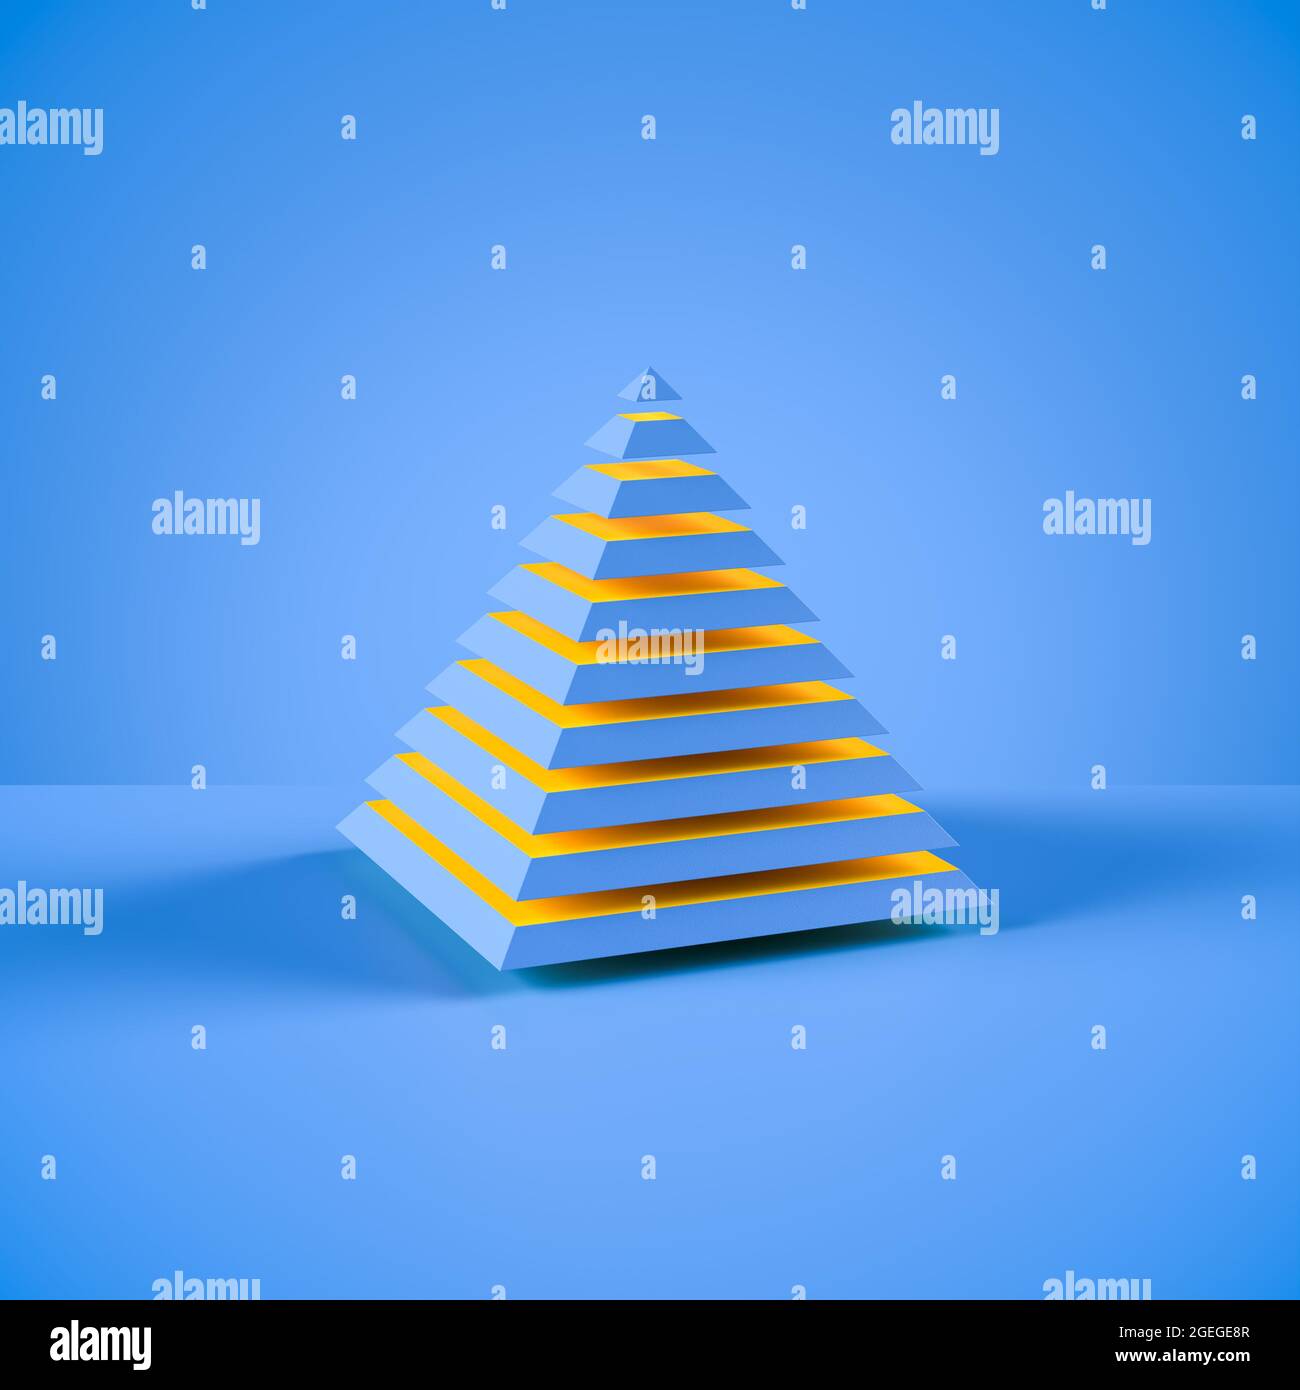 Abstract image of a blue pyramid cut into pieces with yellow inner surfaces. Strict hierarchy concept. Blue background. Stock Photo